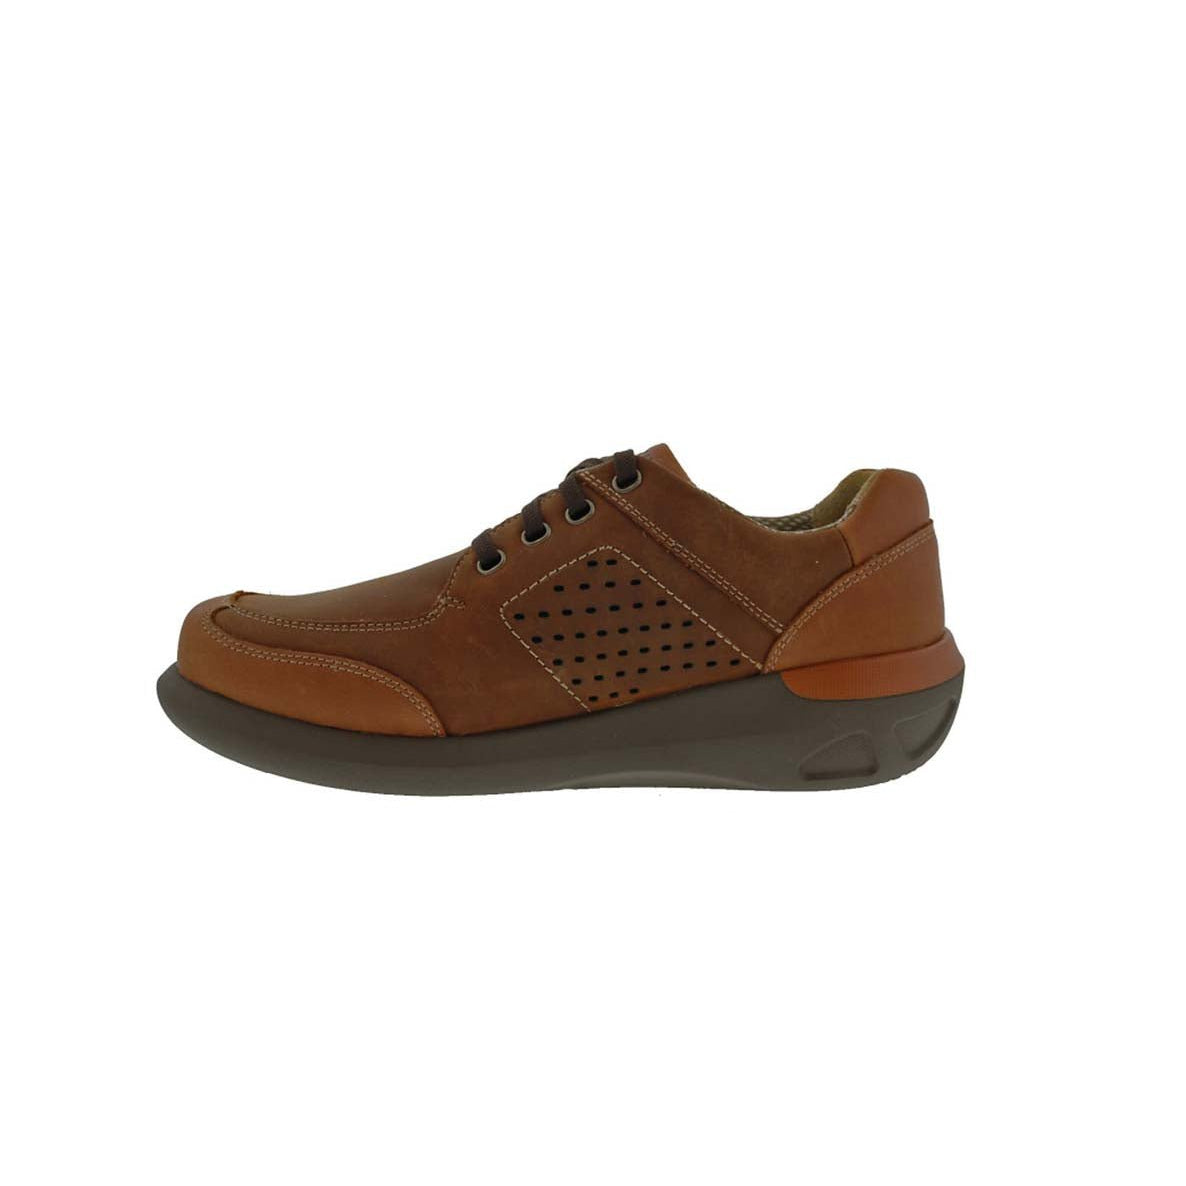 DREW MILES MEN CASUAL SHOE IN CAMEL LEATHER - TLW Shoes